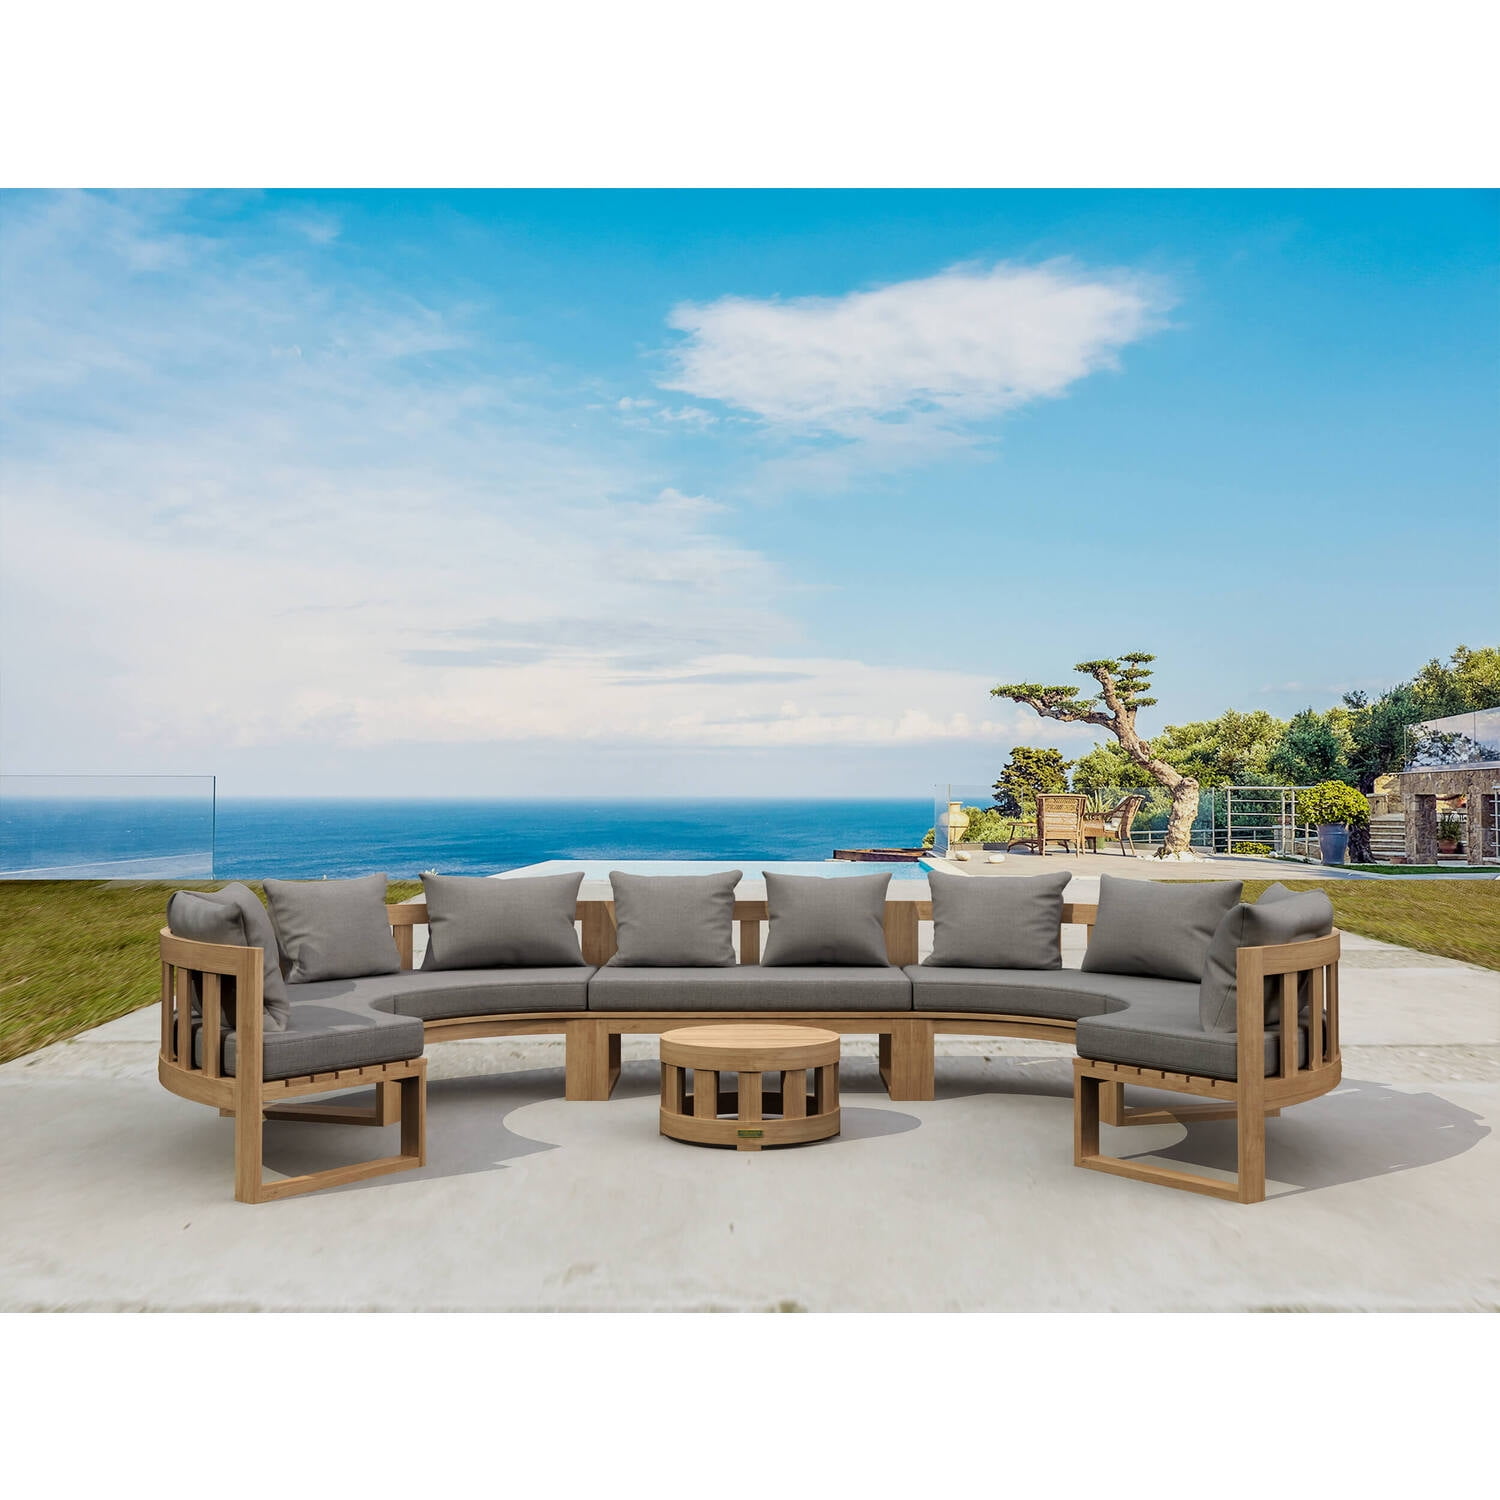 Picture of Anderson Teak SET-812 Circular Modular Deep Seating Set, Natural Smooth Well Sanded